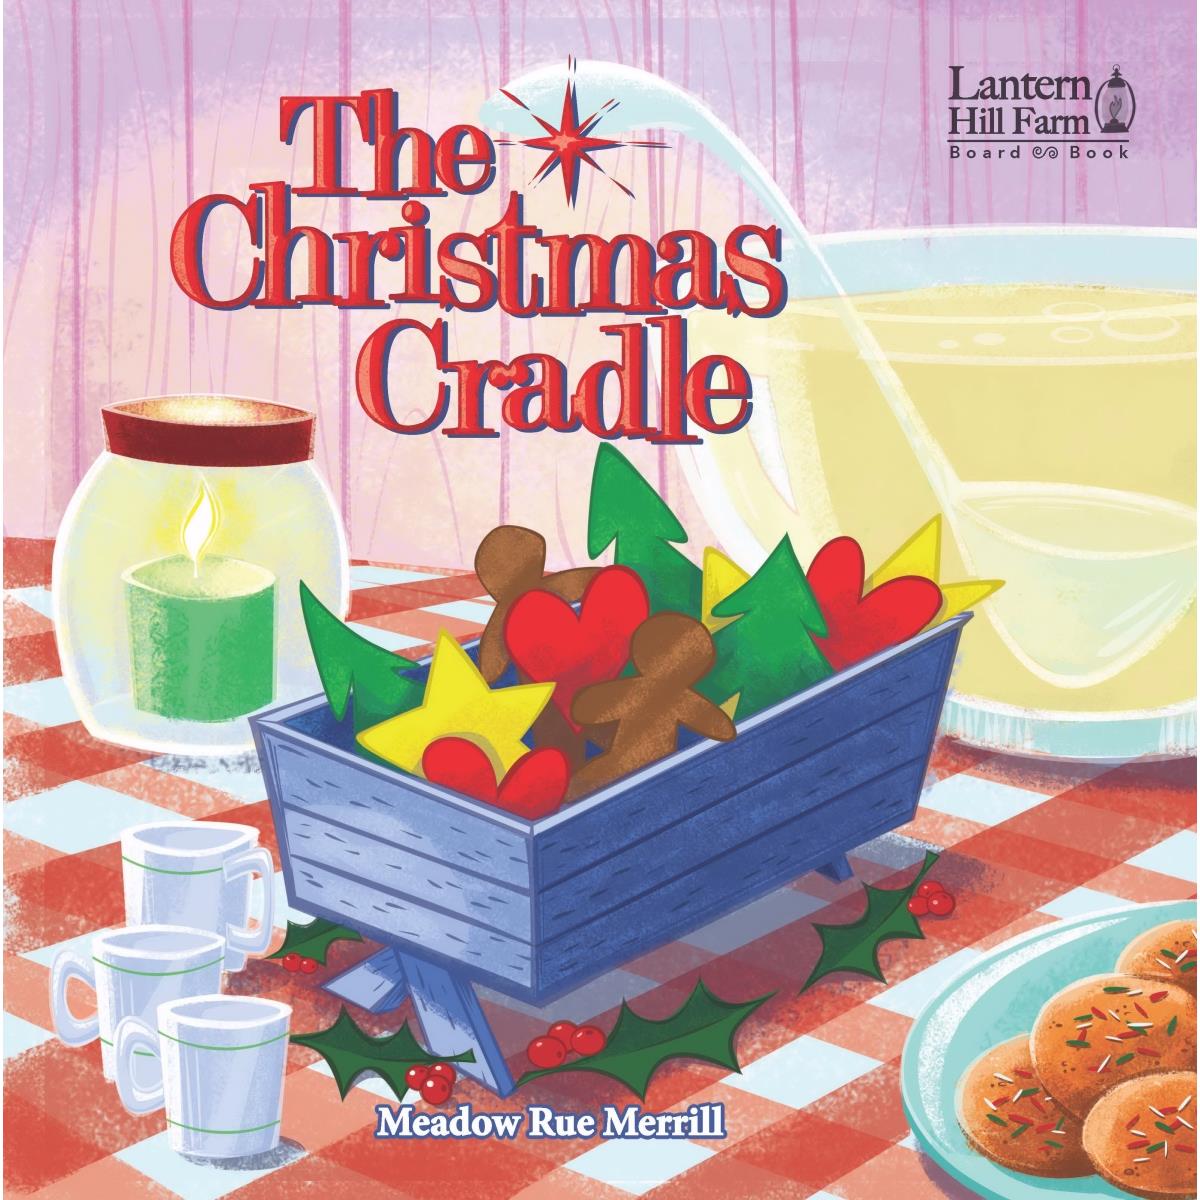 151913 The Christmas Cradle Board Book